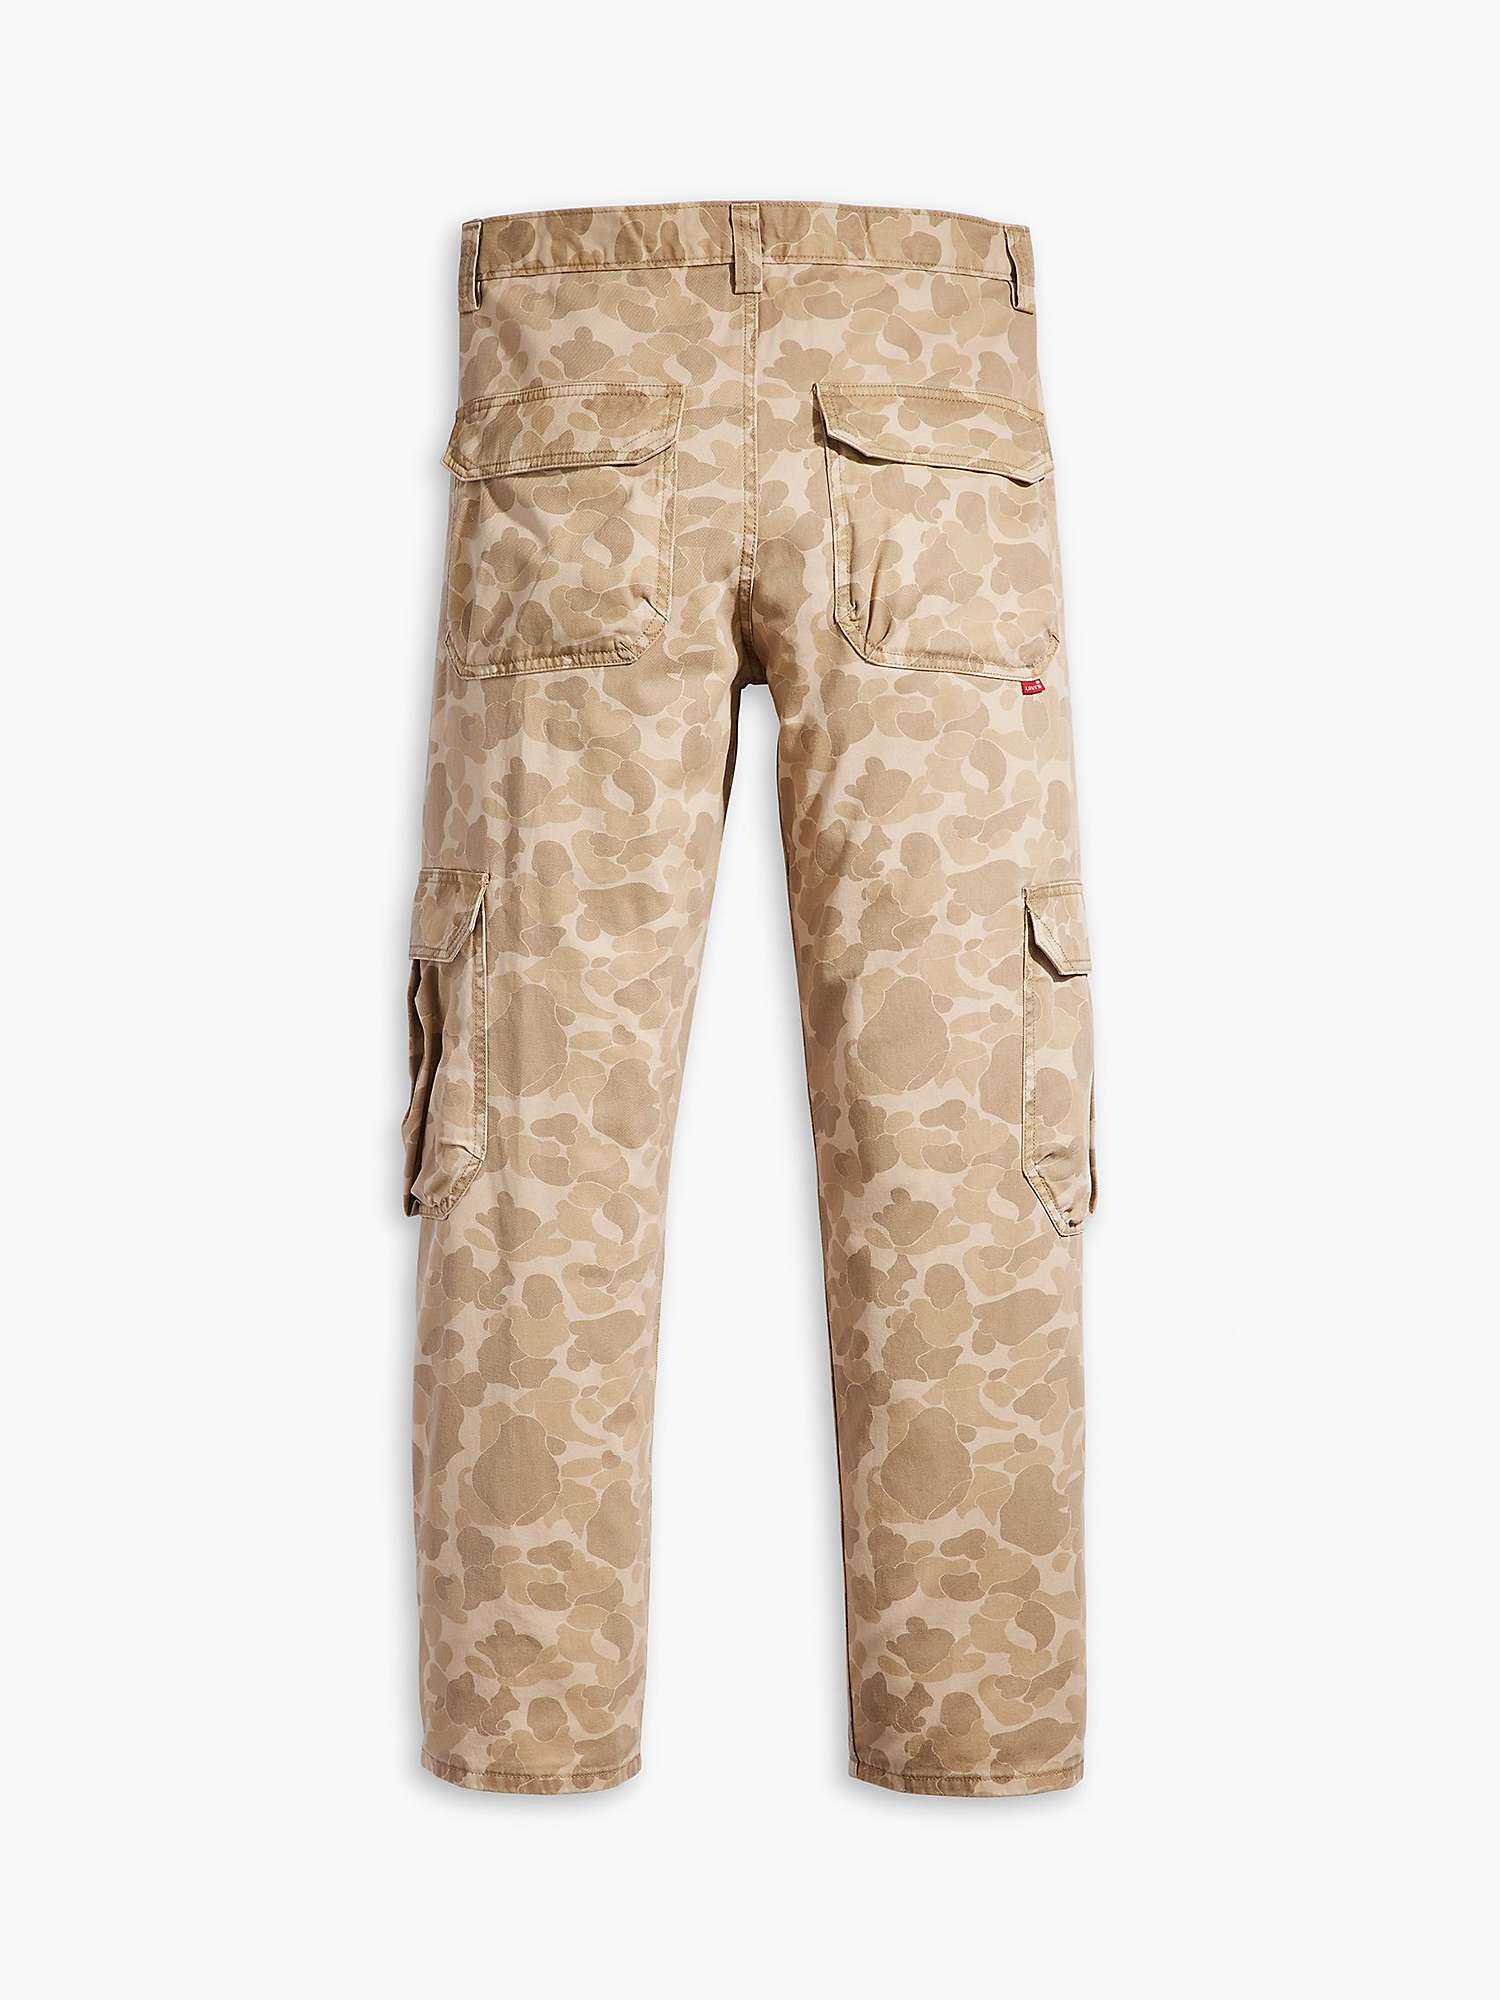 Buy Levi's Stay Loose Cargo Trousers, Green/Multi Online at johnlewis.com